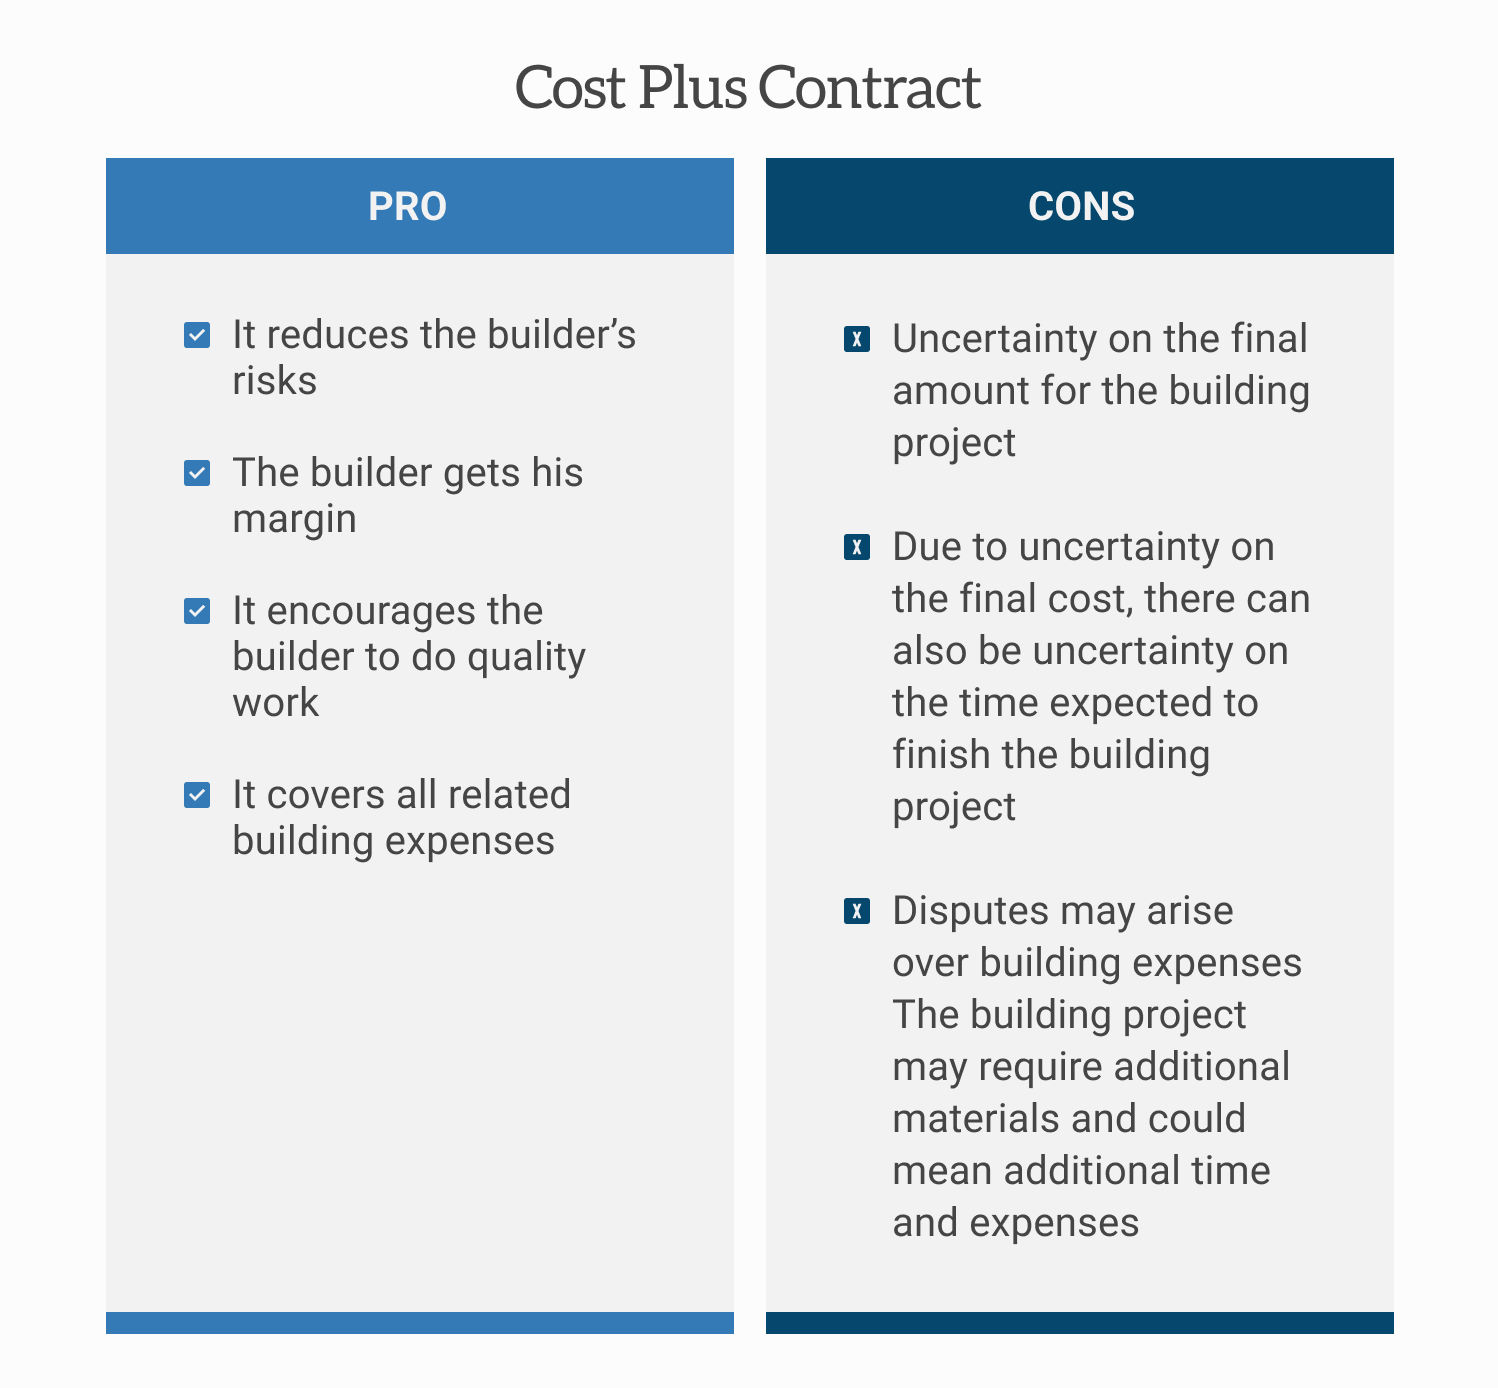 Advantages and Disadvantages of Cost Plus Contract